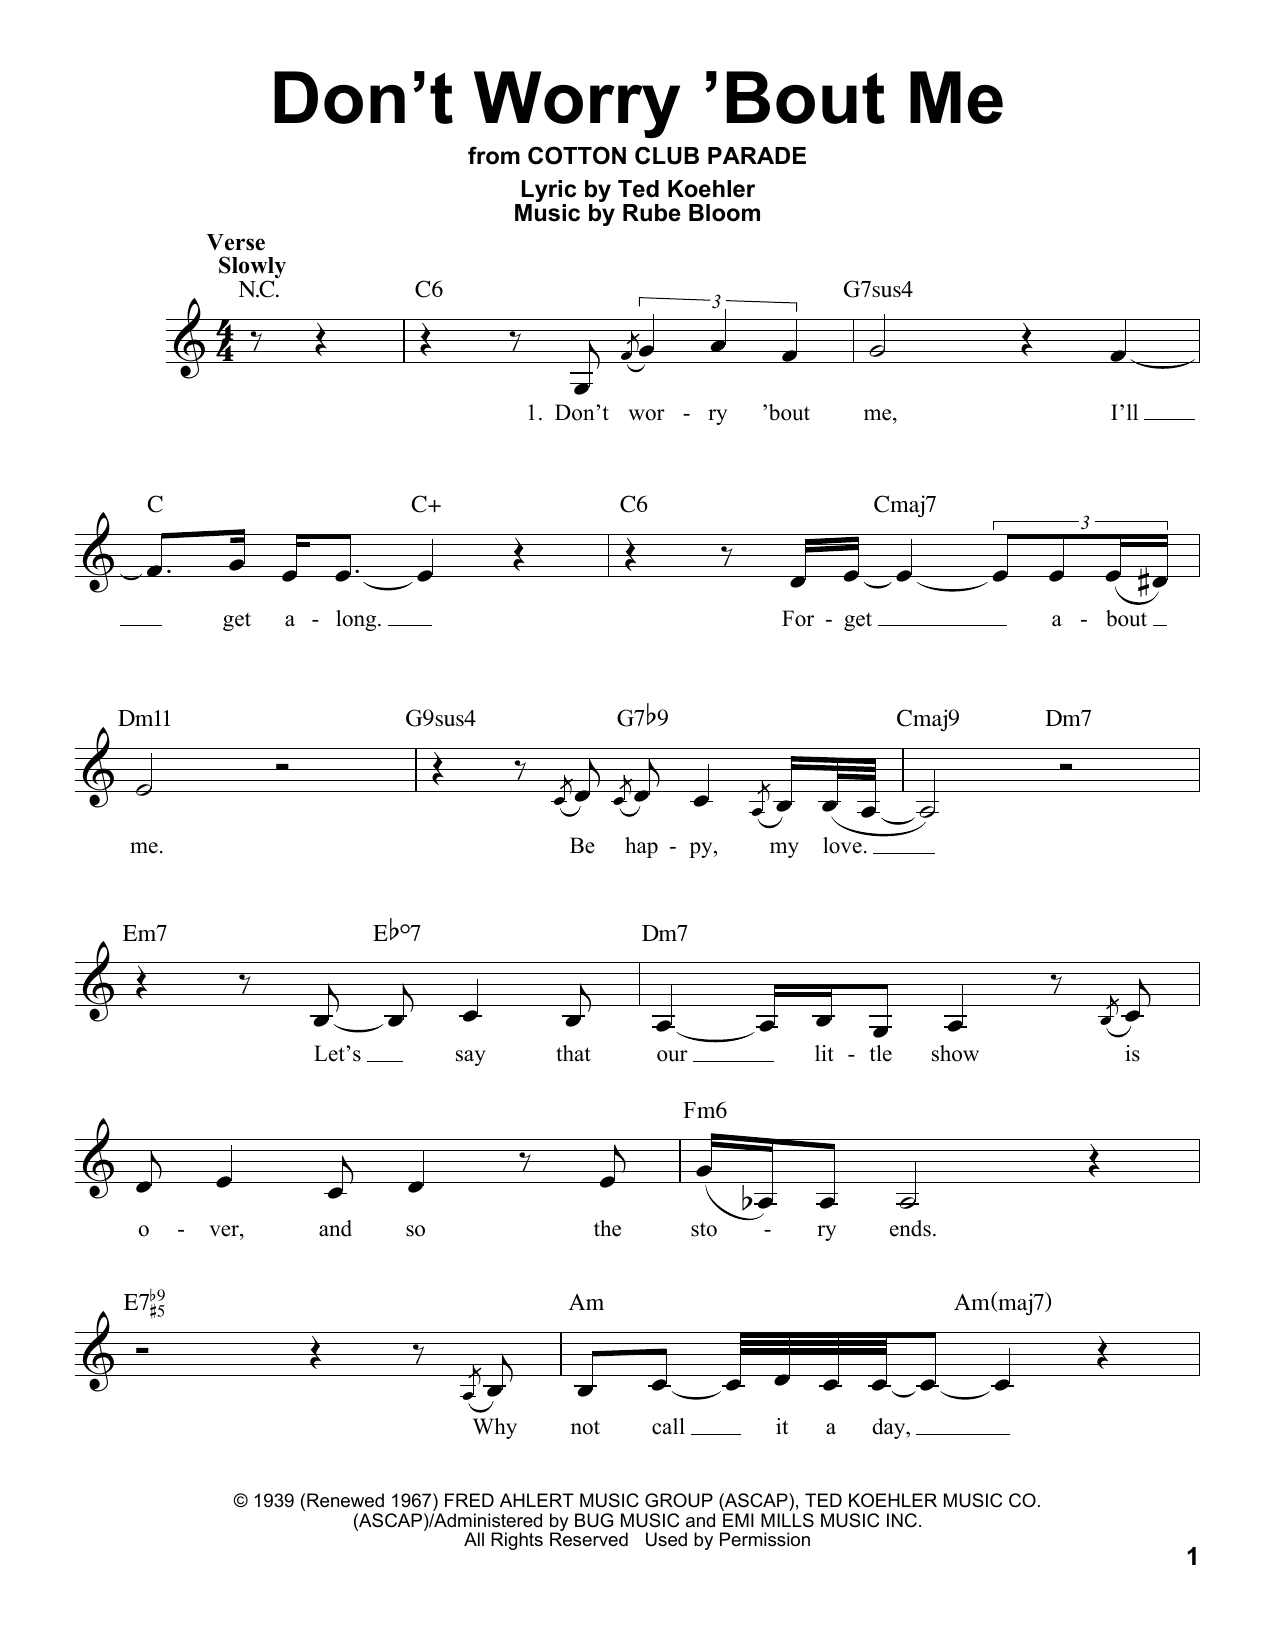 Download Billie Holiday Don't Worry 'Bout Me Sheet Music